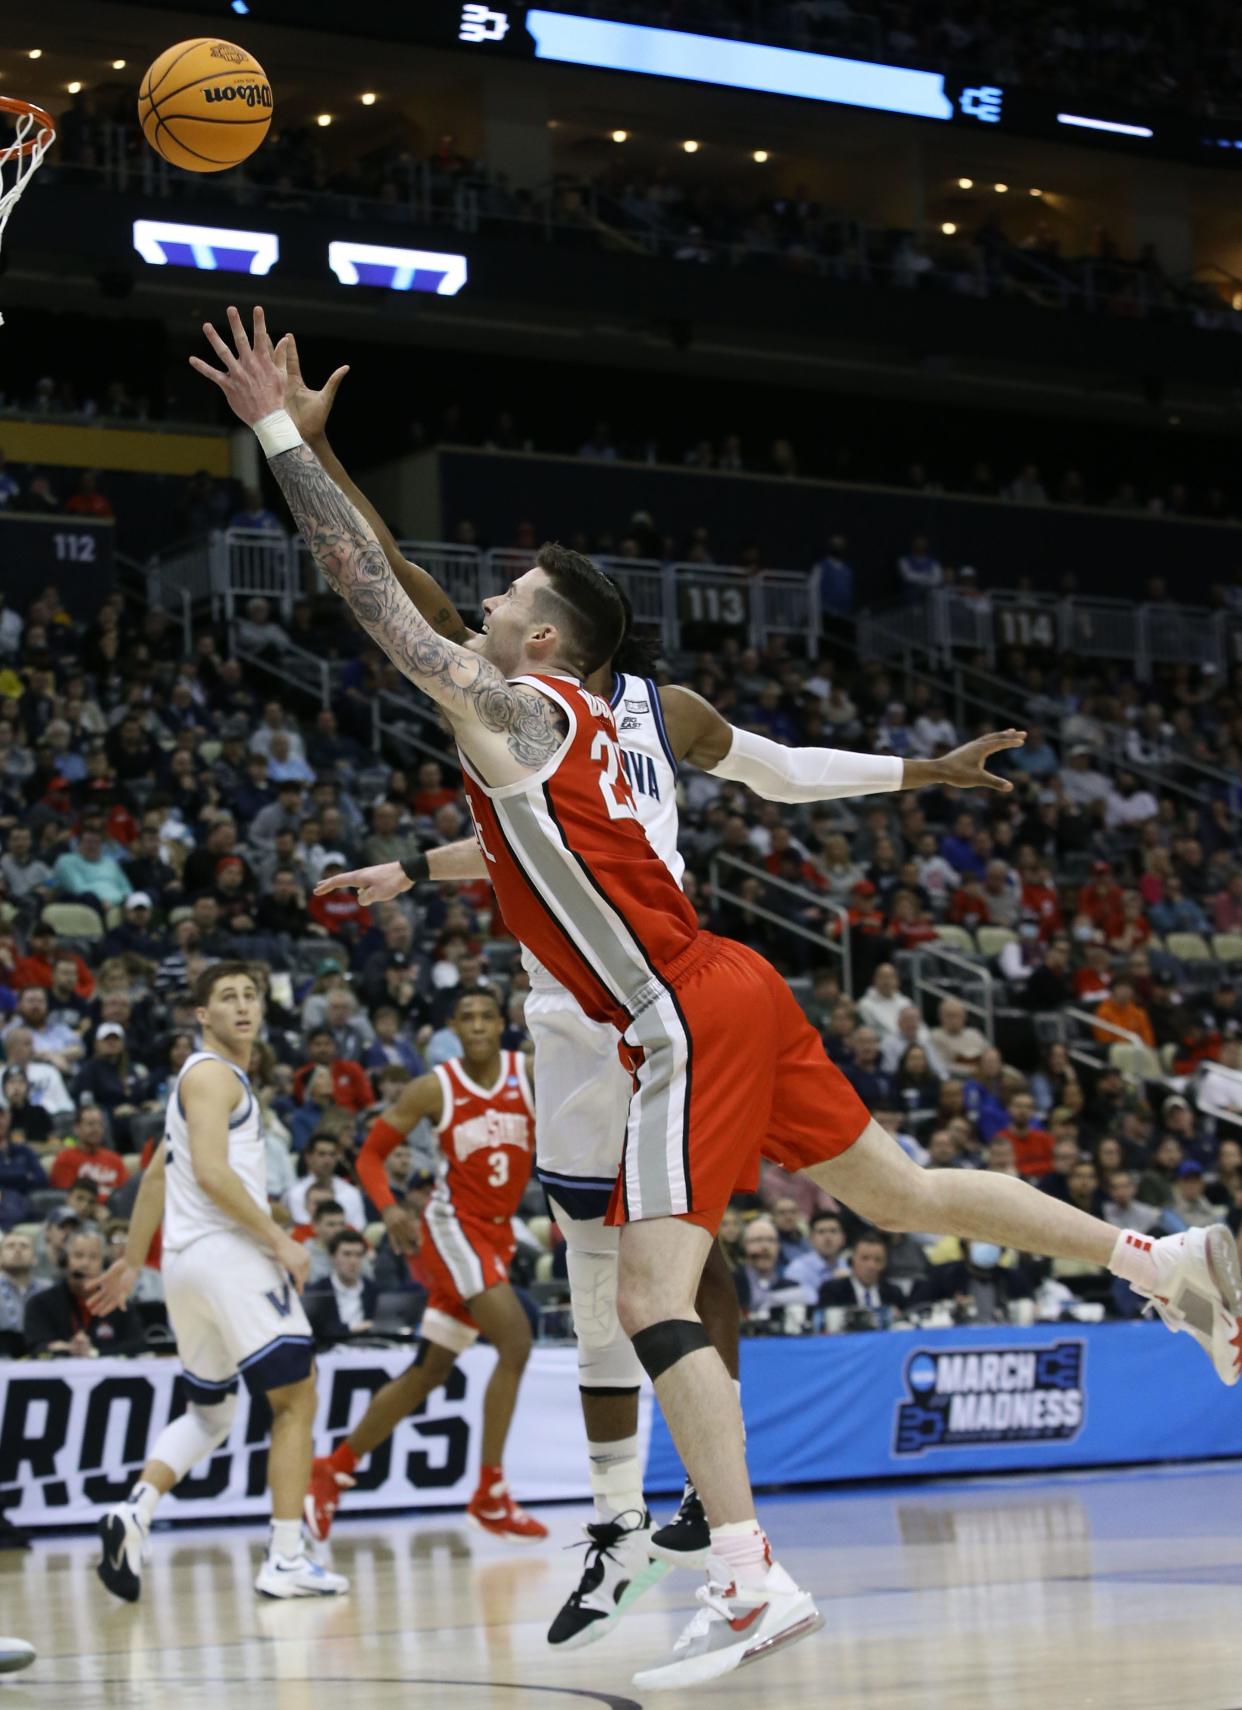 Mar 20, 2022; Pittsburgh, PA, USA; Ohio State Buckeyes forward Kyle Young (25) attempts to shoot the ball on Villanova Wildcats forward Eric Dixon (43) in the second half during the second round of the 2022 NCAA Tournament at PPG Paints Arena. Mandatory Credit: Charles LeClaire-USA TODAY Sports